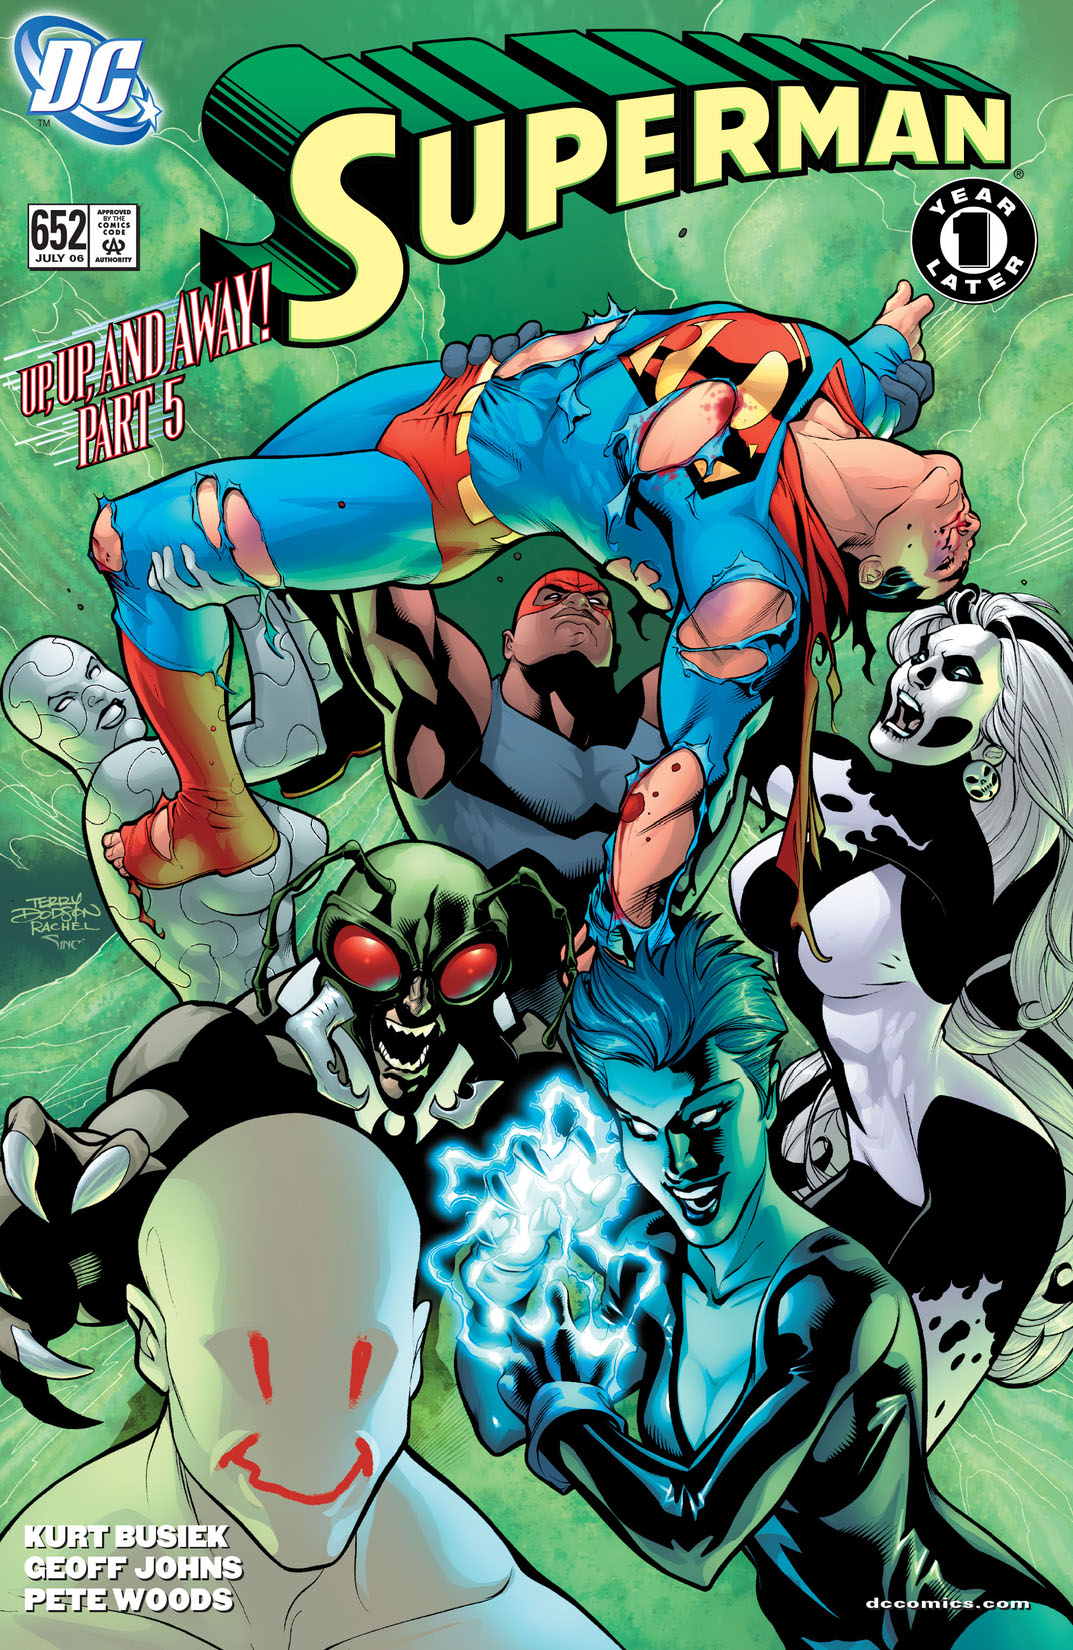 Superman (2006-) #652 preview images